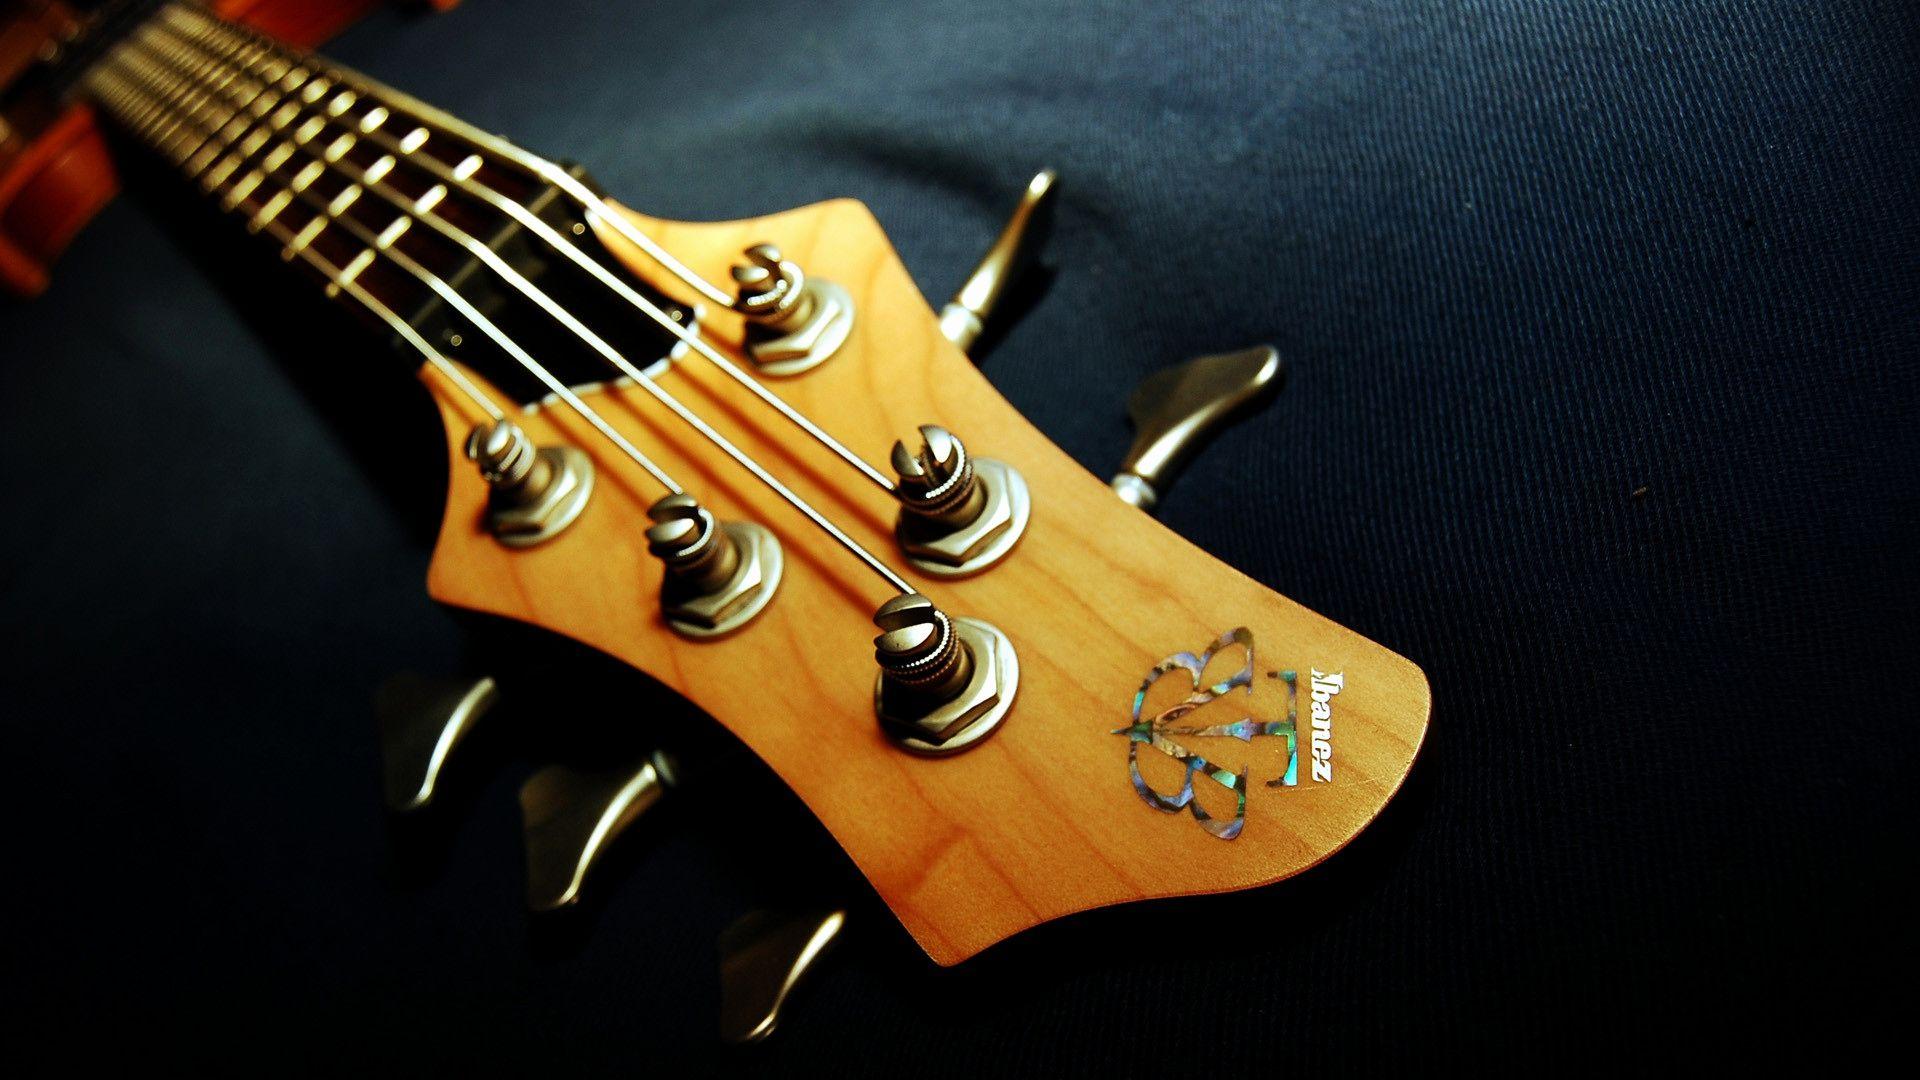 Ibanez Yellow Free HD Picture Wallpaper Download Fresh Ibanez Bass